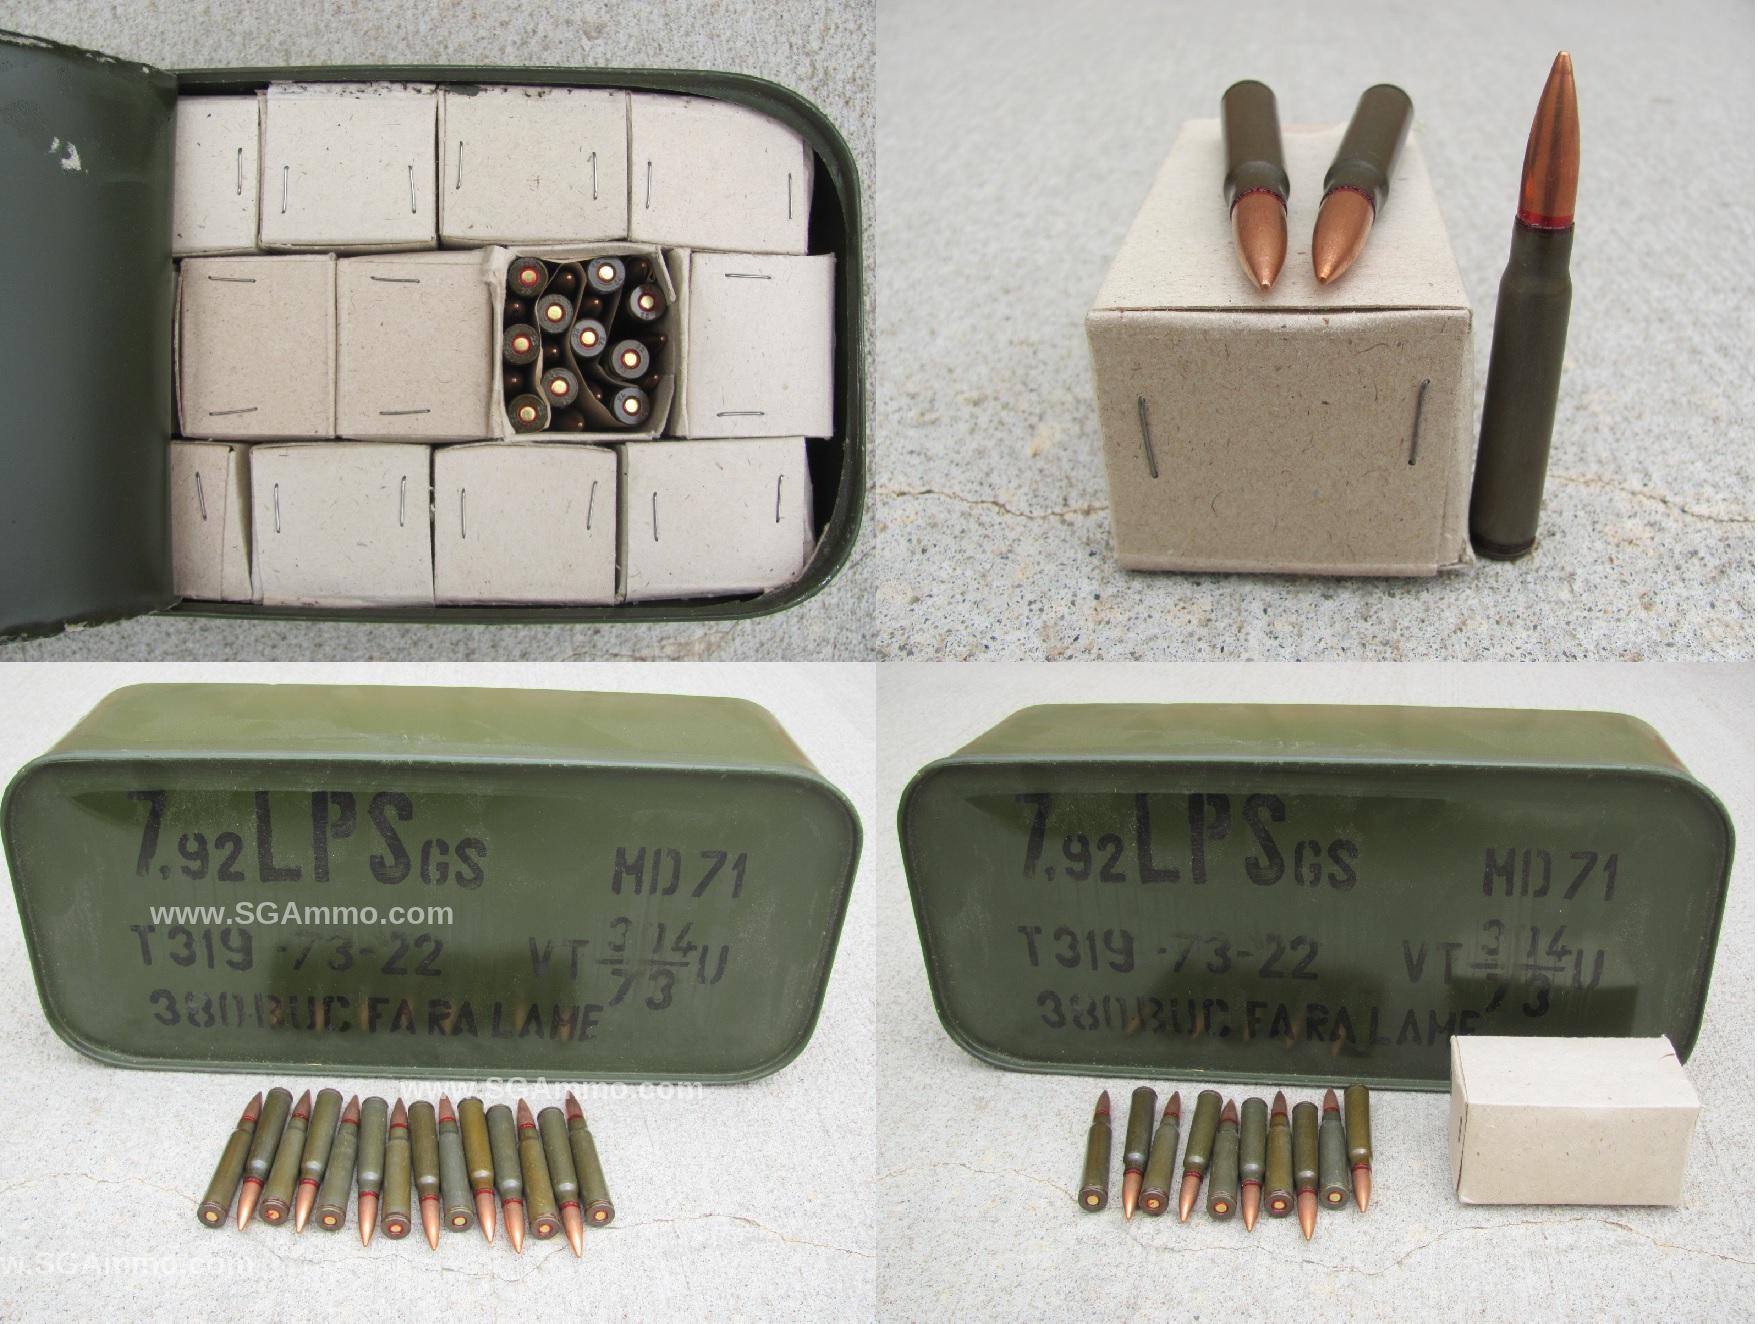 8mm Mauser - 380 Round Spam Can - 154 Grain FMJ Steel Case Ammo Made in Romania - NO CRATE